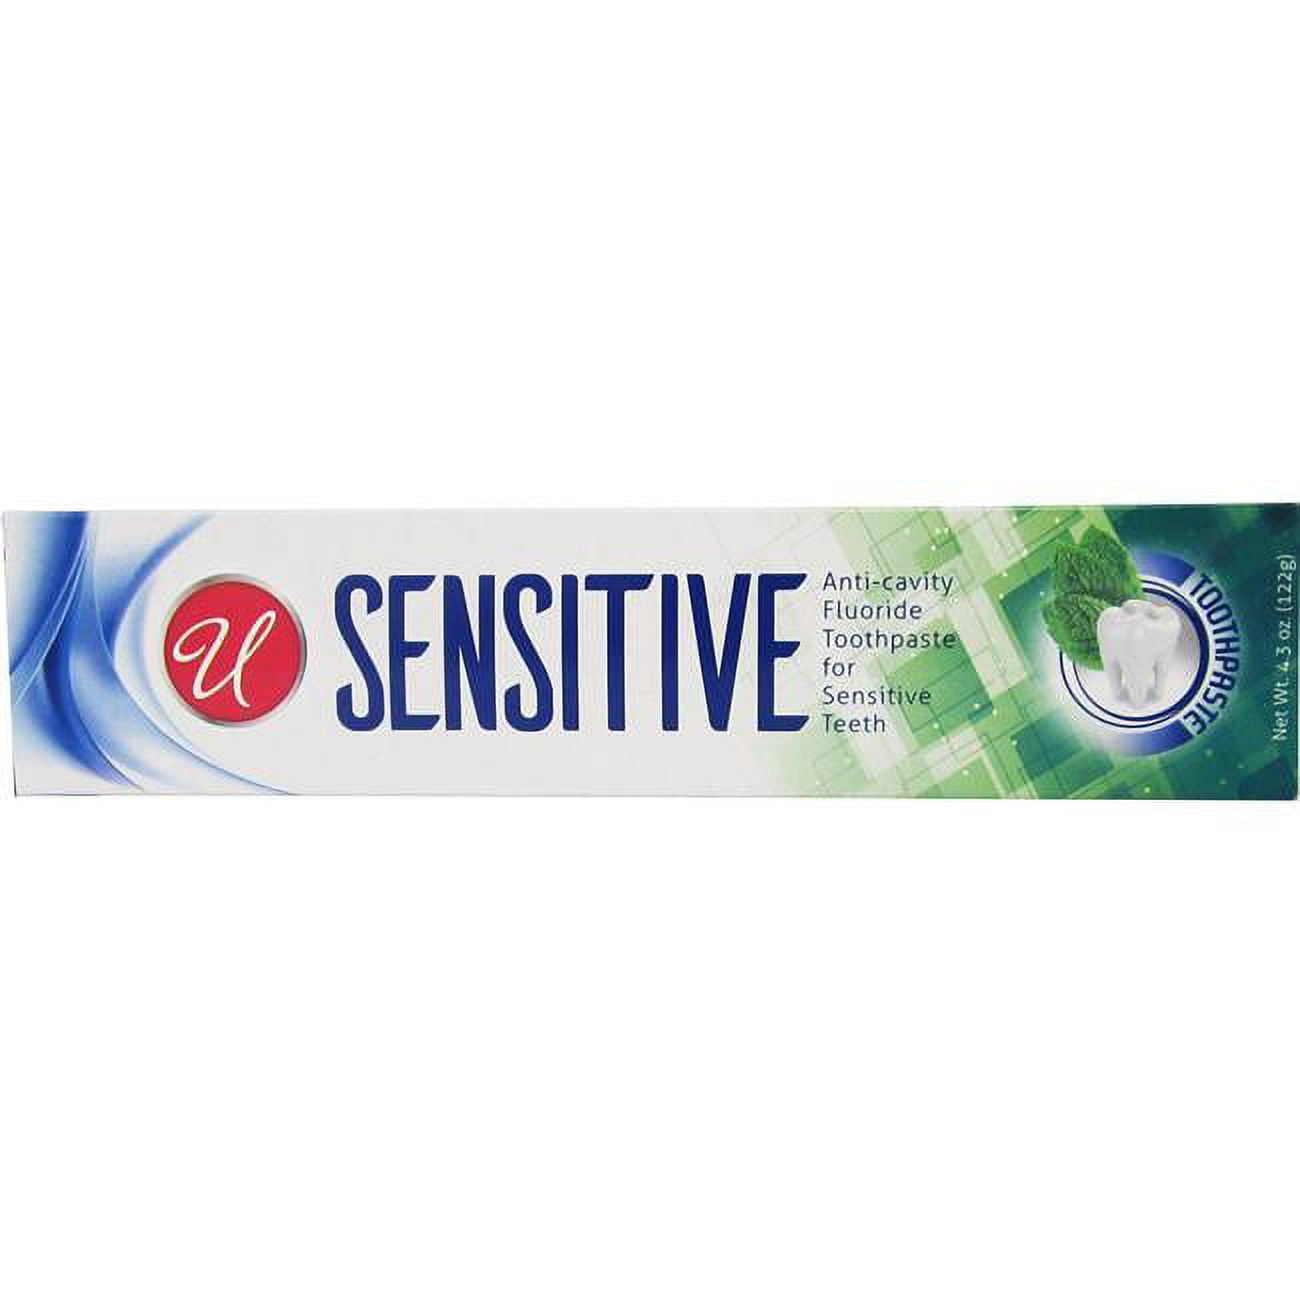 Picture of DDI 2290777 Sensitive Toothpaste 4.3 oz Case of 48